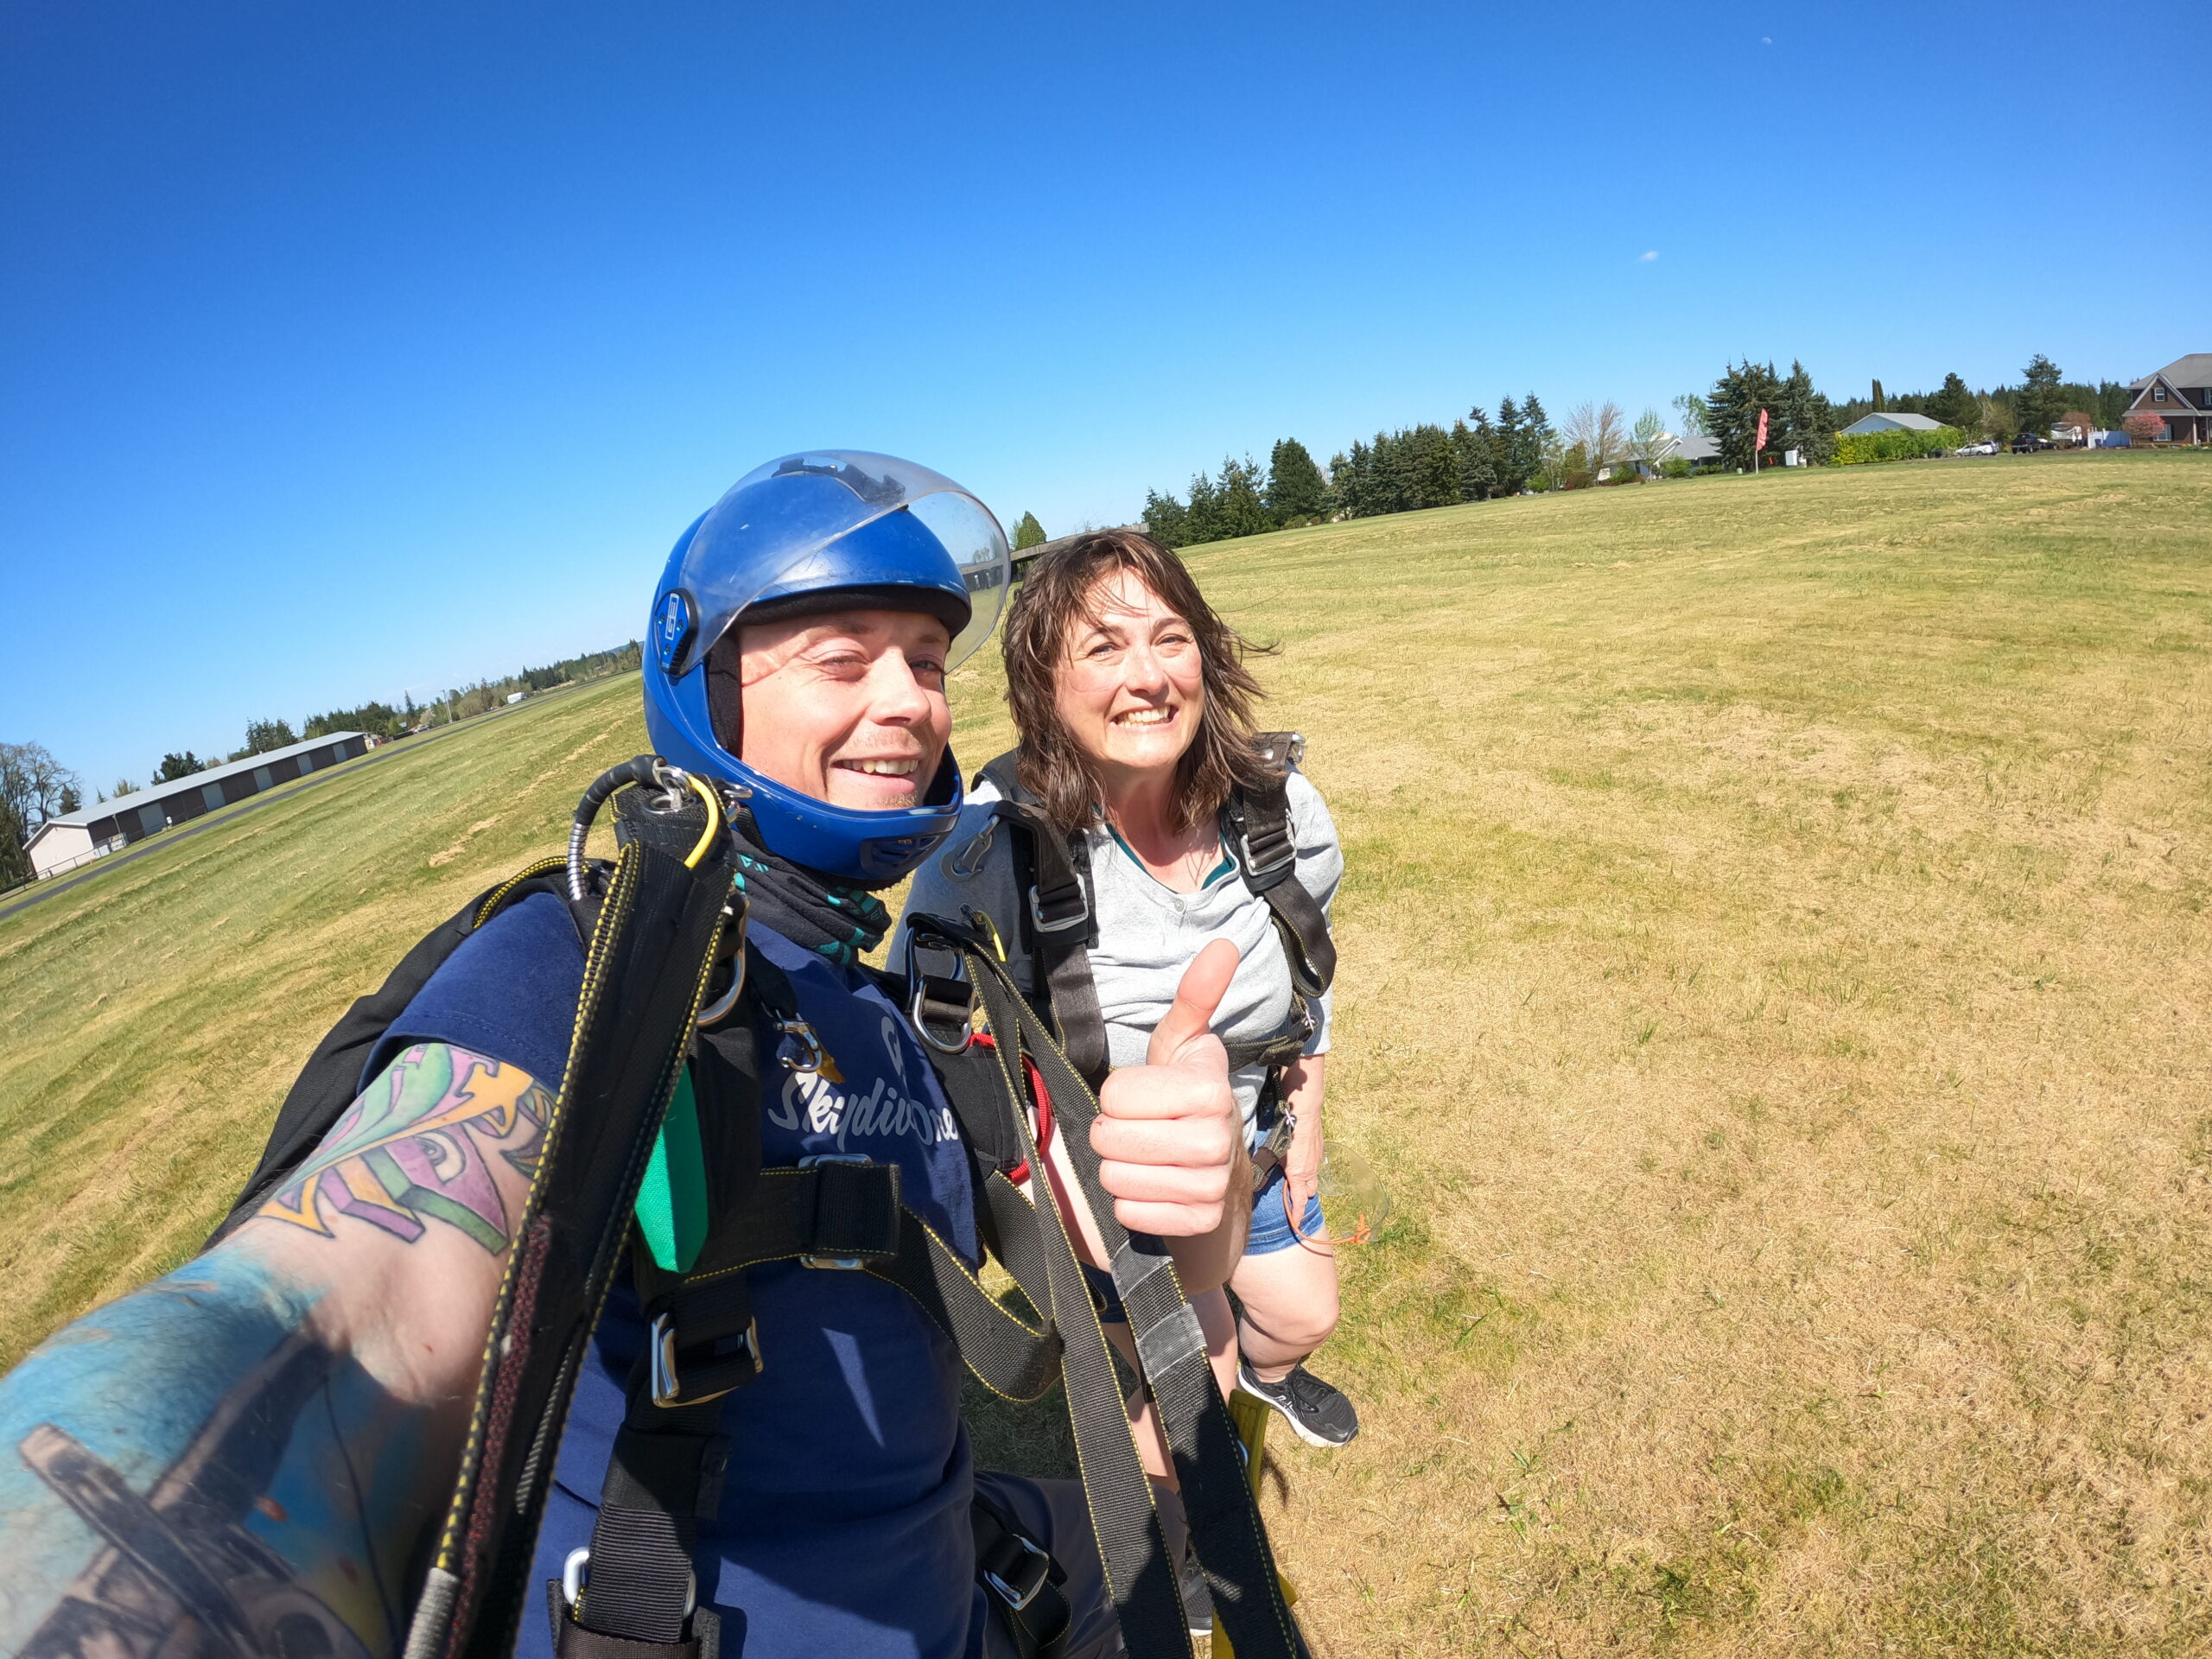 Guy and gal smiling for picture after landing on ground from skydiving.